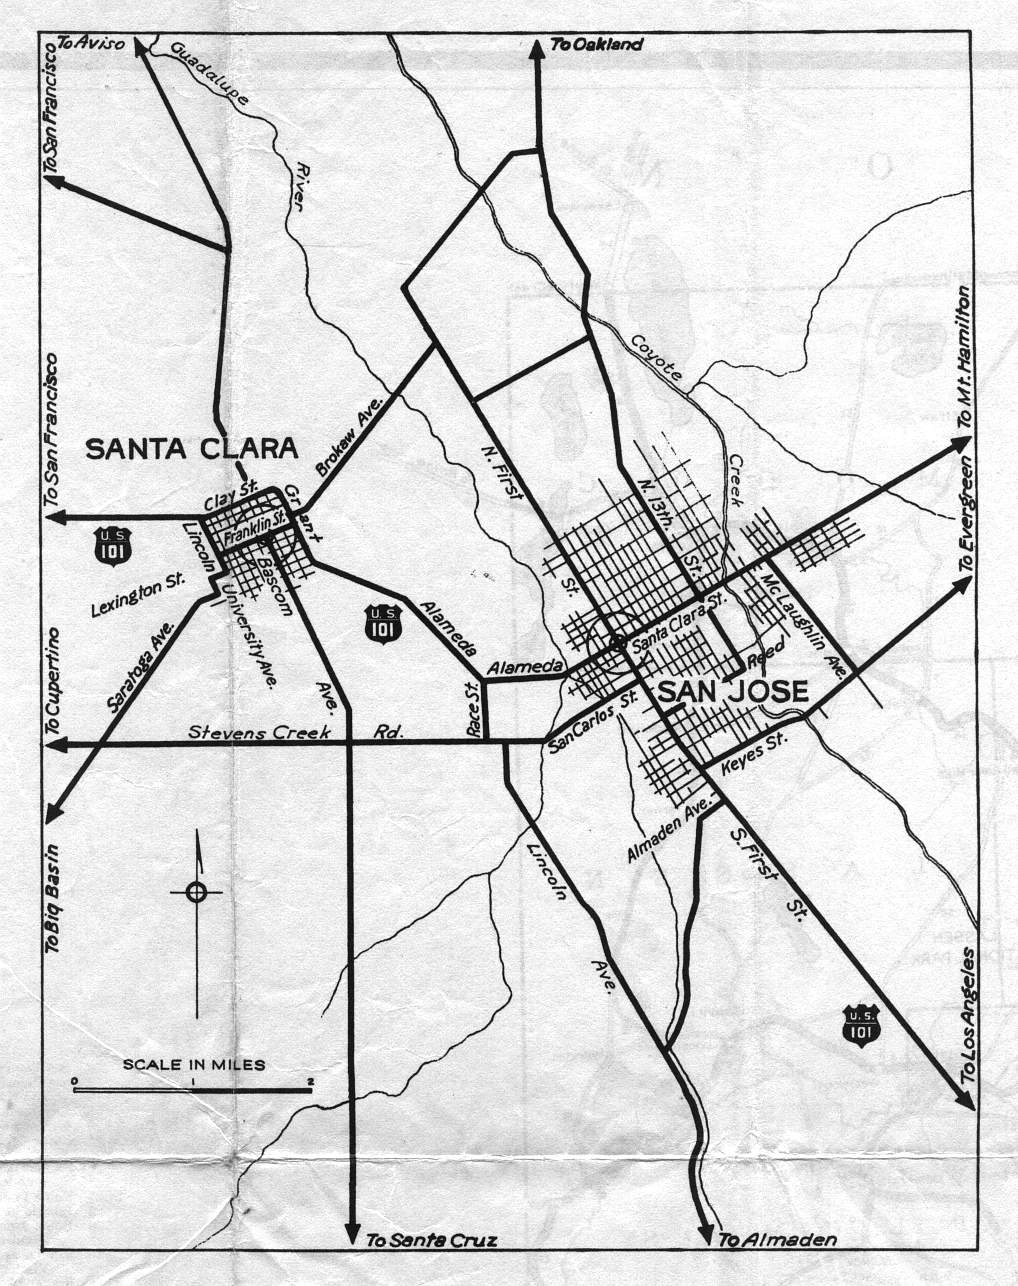 Detail map for San Jose on the 1936 California official highway map